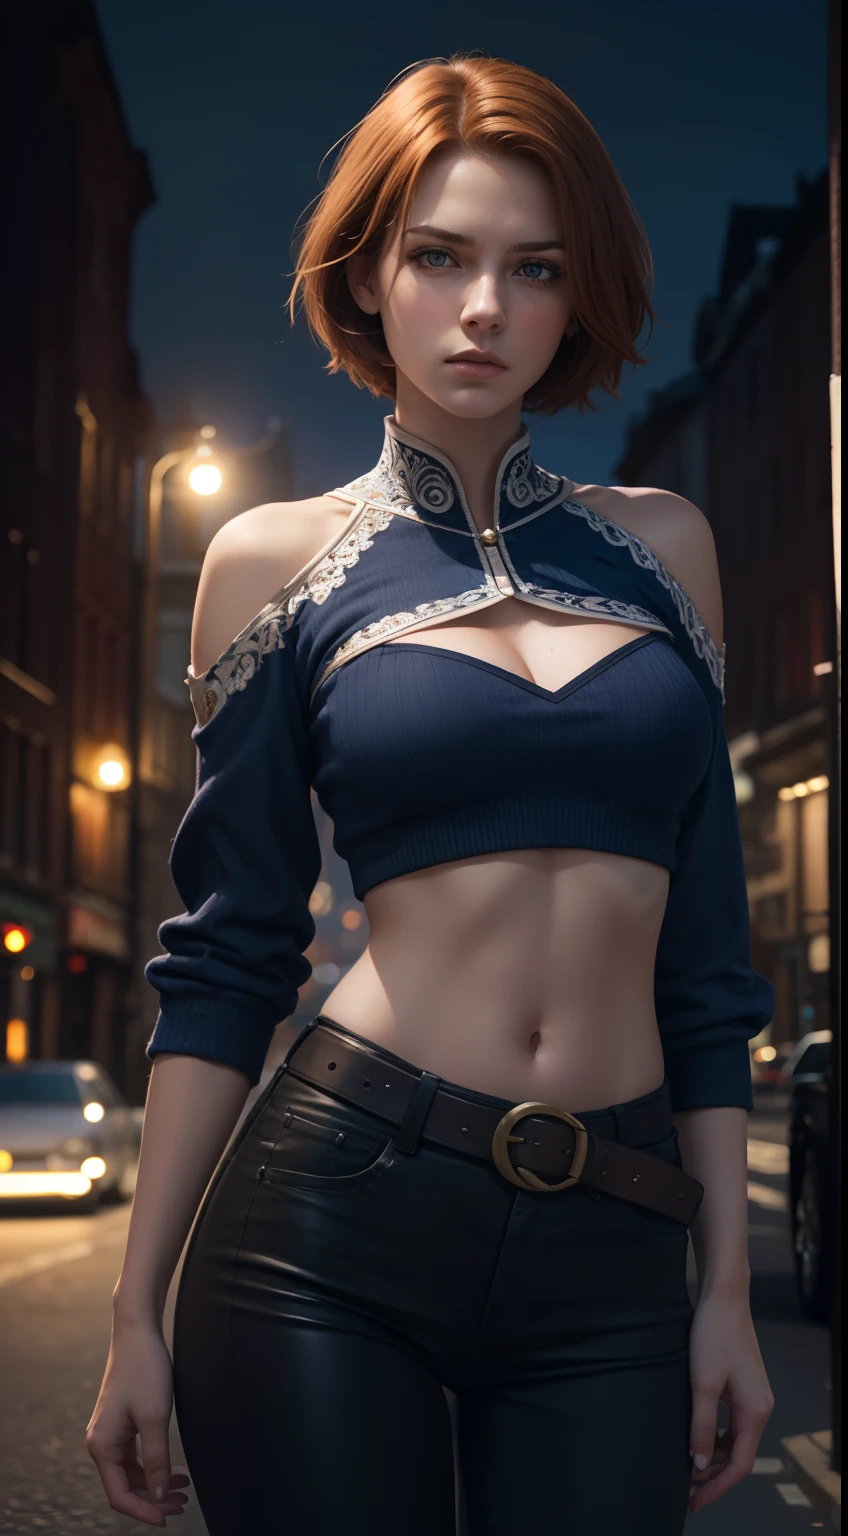 (A beautiful 20-year-old British female assassin), (Short ginger hair), (Pale skin), (serious looking), (Wearing white and blue Assassin costumes), (city at night background), seen from the front, waist up shot, Dynamic pose, Ambient lighting, Photo realism, intricate face details, Intricate hand details, Highly detailed, Vibrant colors, Cinematic, High definition, Popular on art sites - original style